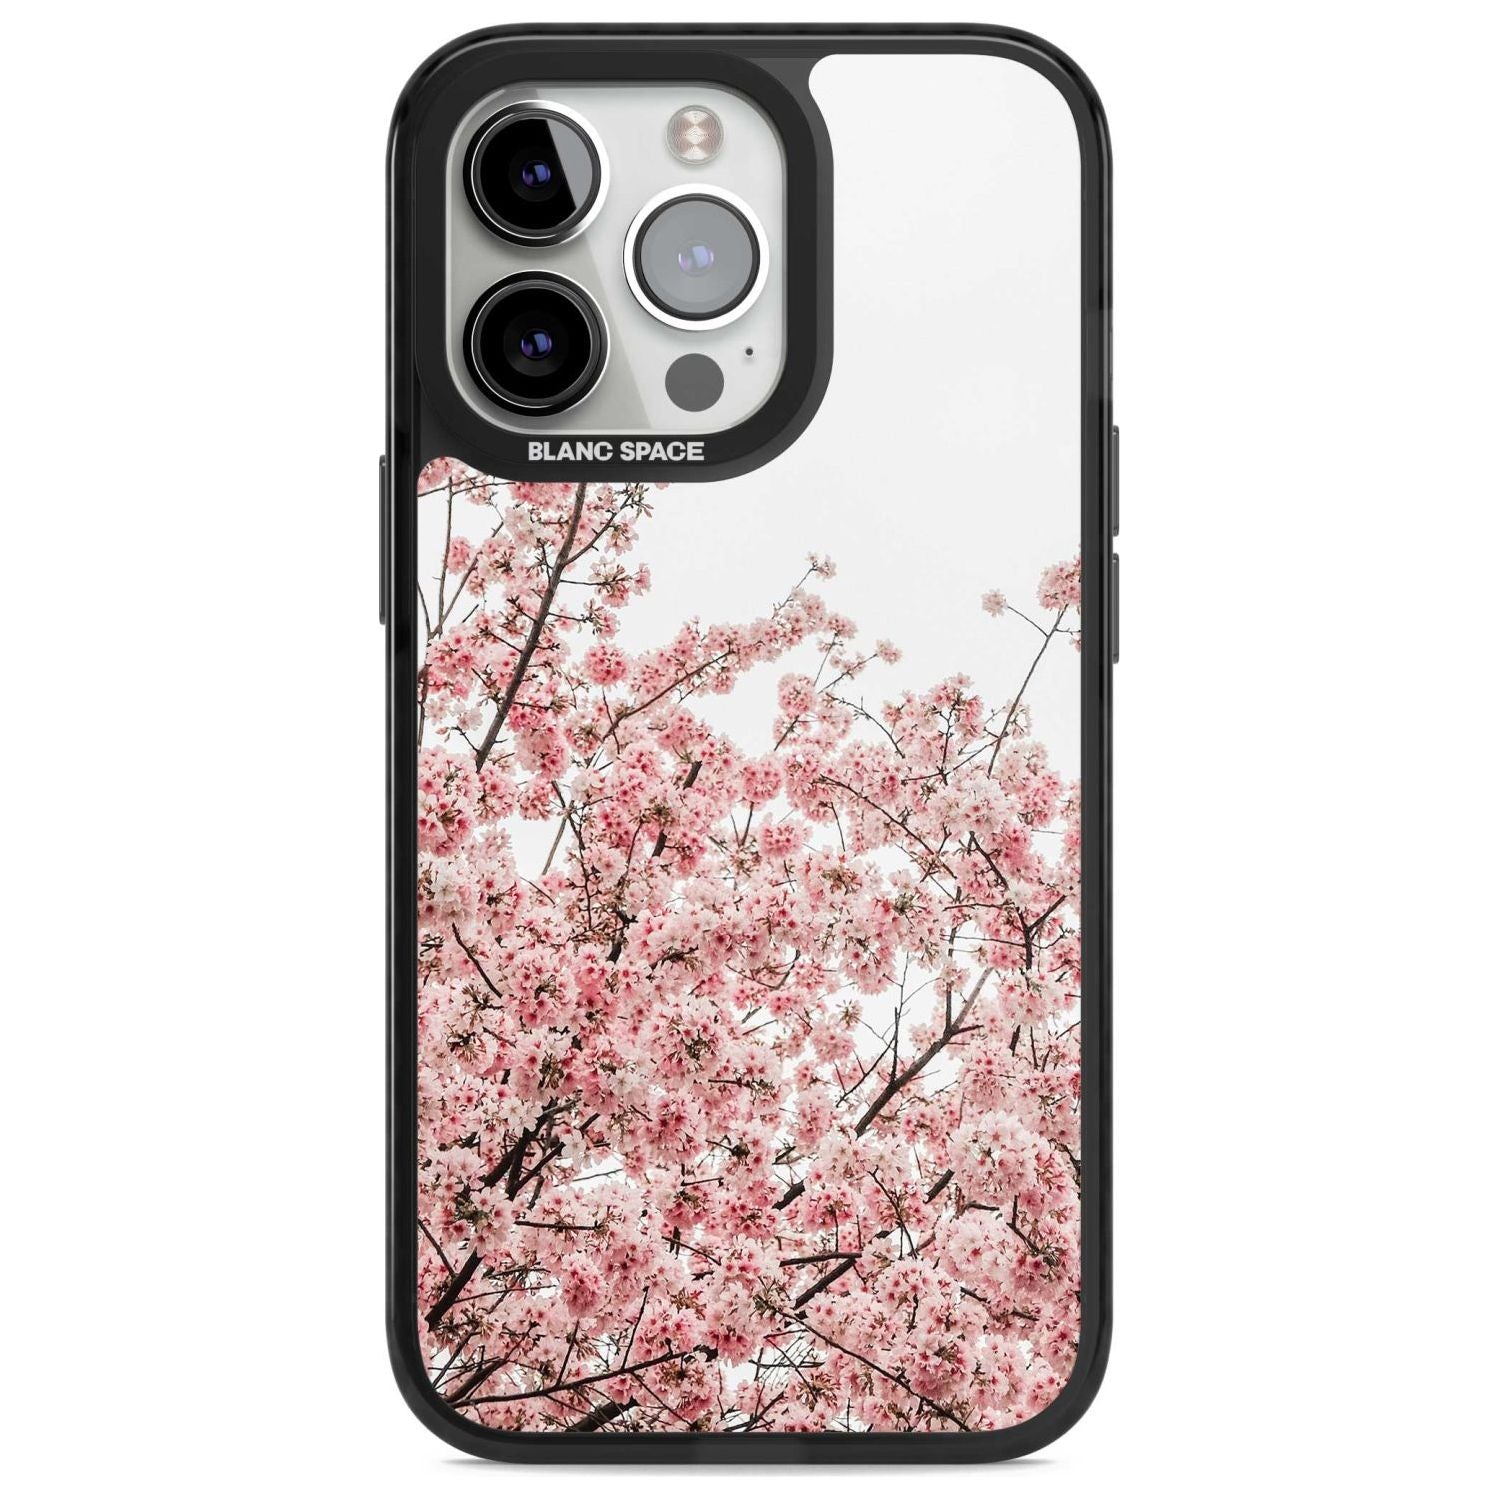 Cherry Blossoms - Real Floral Photographs Phone Case iPhone 15 Pro Max / Magsafe Black Impact Case,iPhone 15 Pro / Magsafe Black Impact Case,iPhone 14 Pro Max / Magsafe Black Impact Case,iPhone 14 Pro / Magsafe Black Impact Case,iPhone 13 Pro / Magsafe Black Impact Case Blanc Space